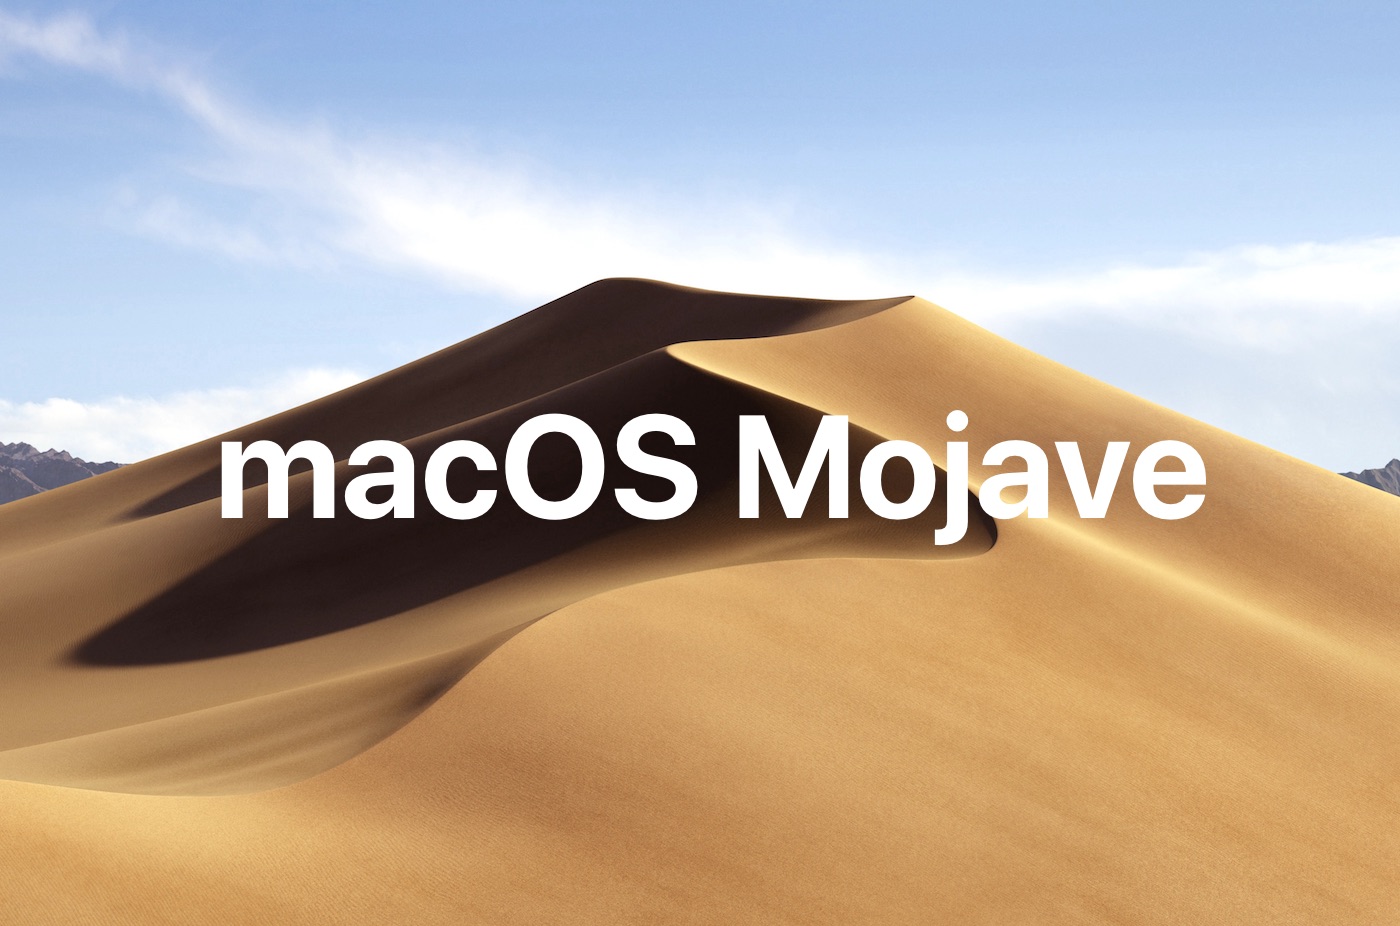 diskmaker x 8 for macos mojave